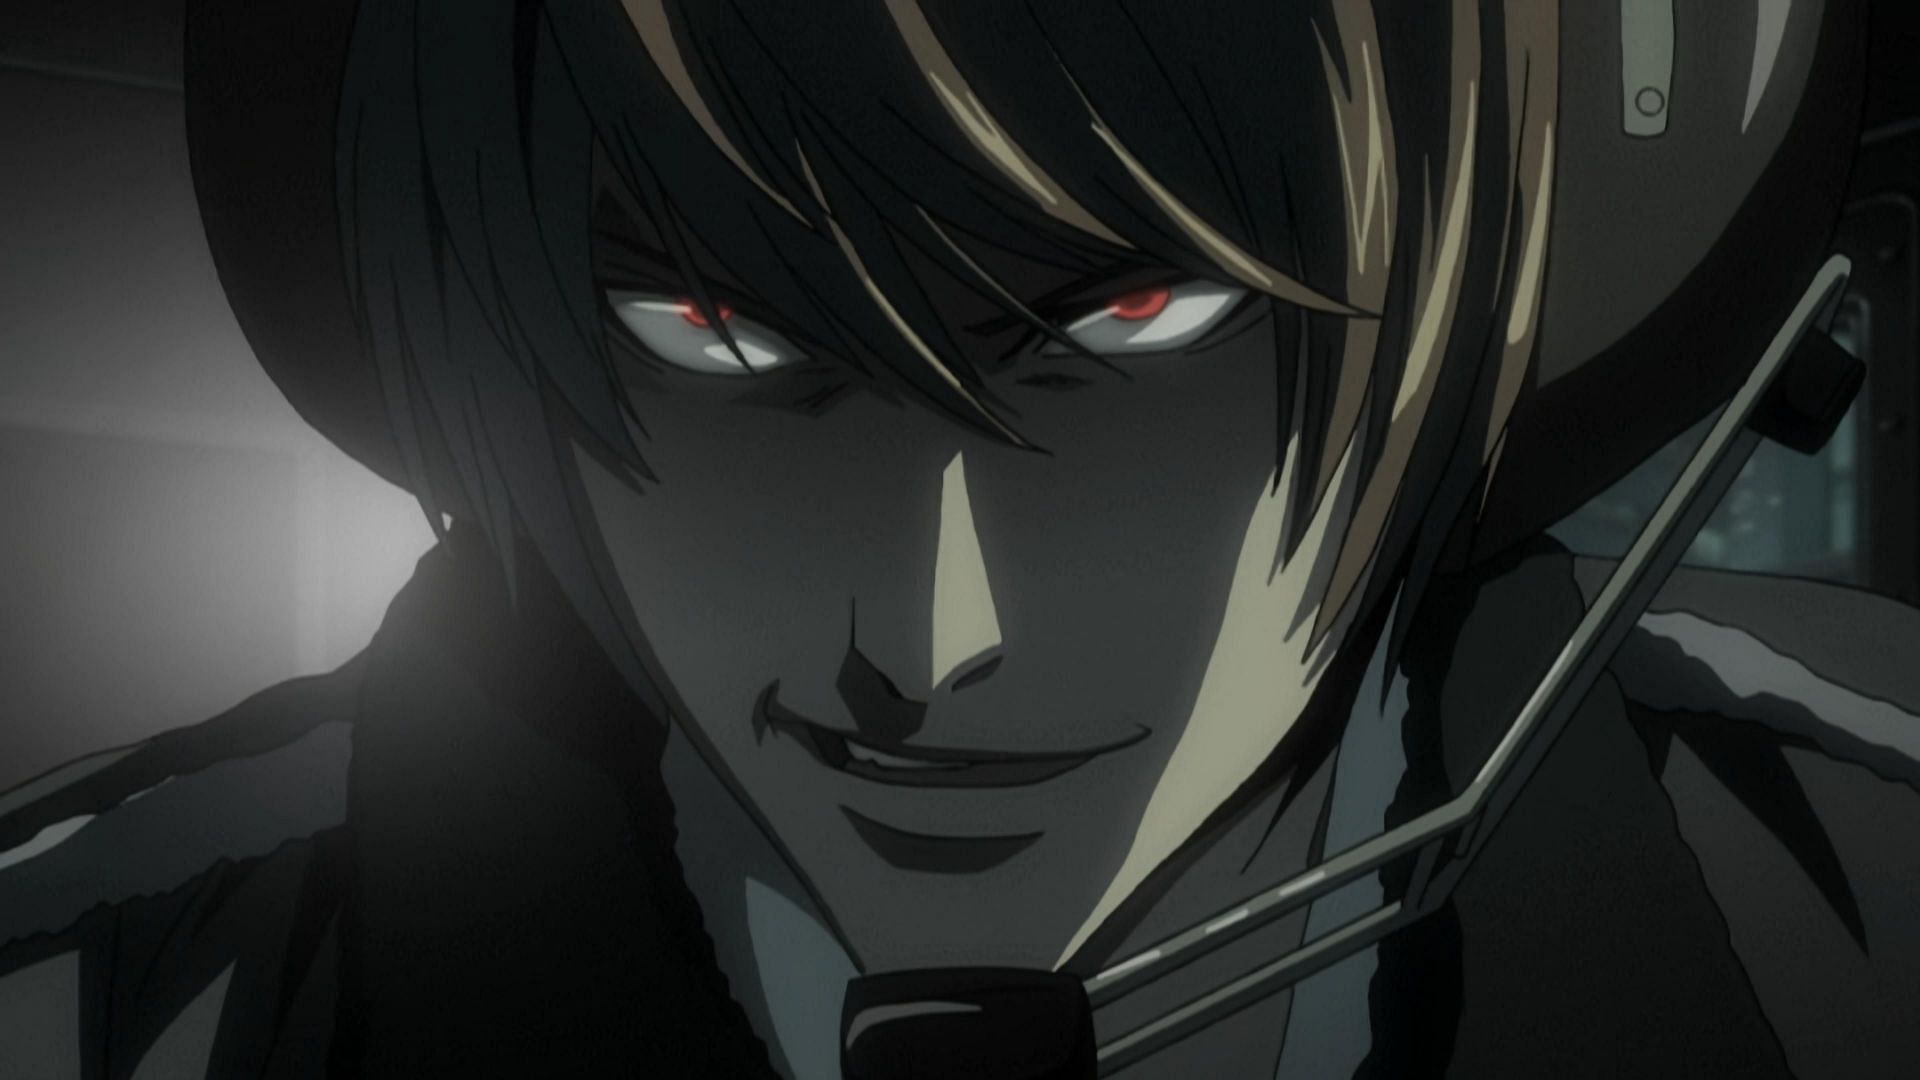 Light Yagami as seen in the anime Death Note (Image via Studio Madhouse)